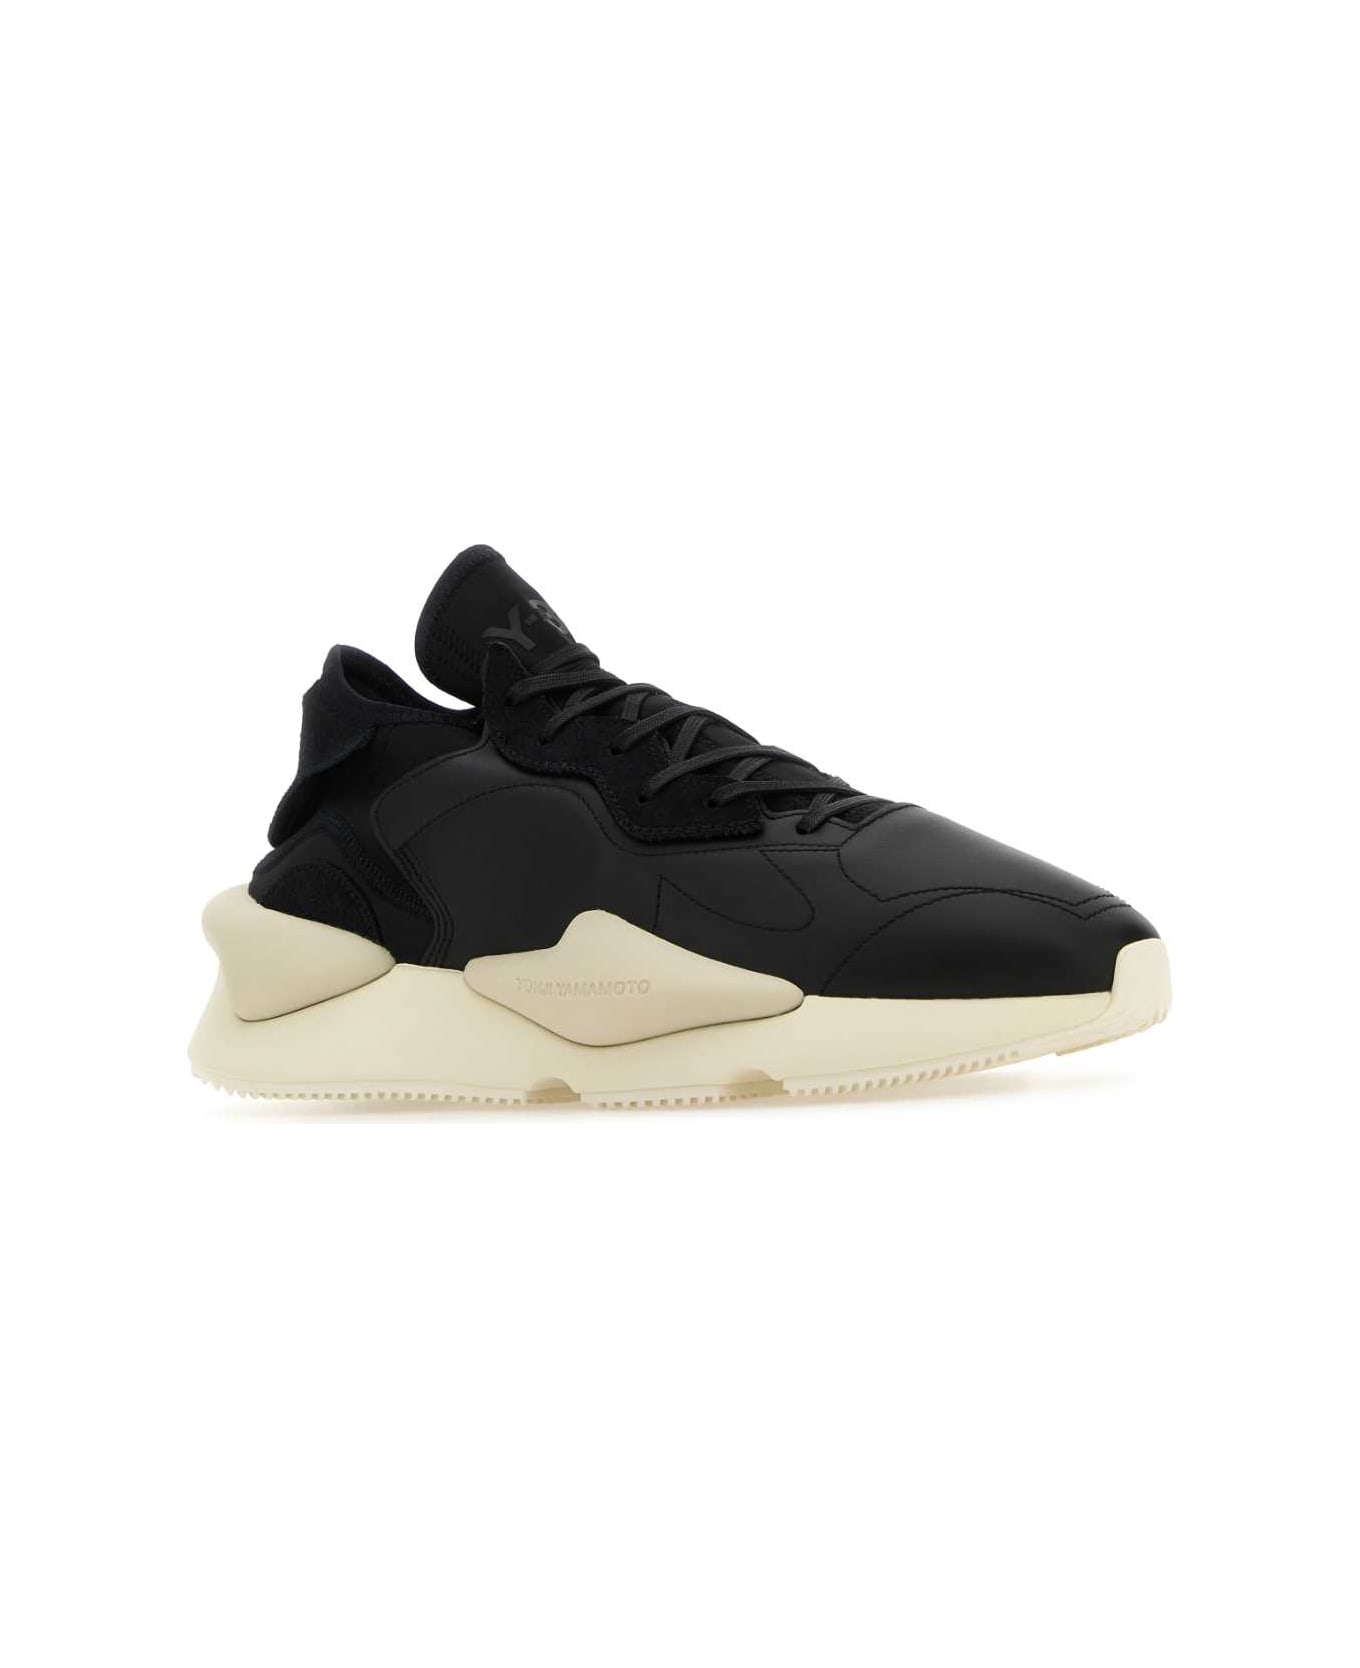 Y-3 Black Fabric And Leather Y-3 Kaiwa Sneakers - BLACKOFFWHITECLEARBROWN